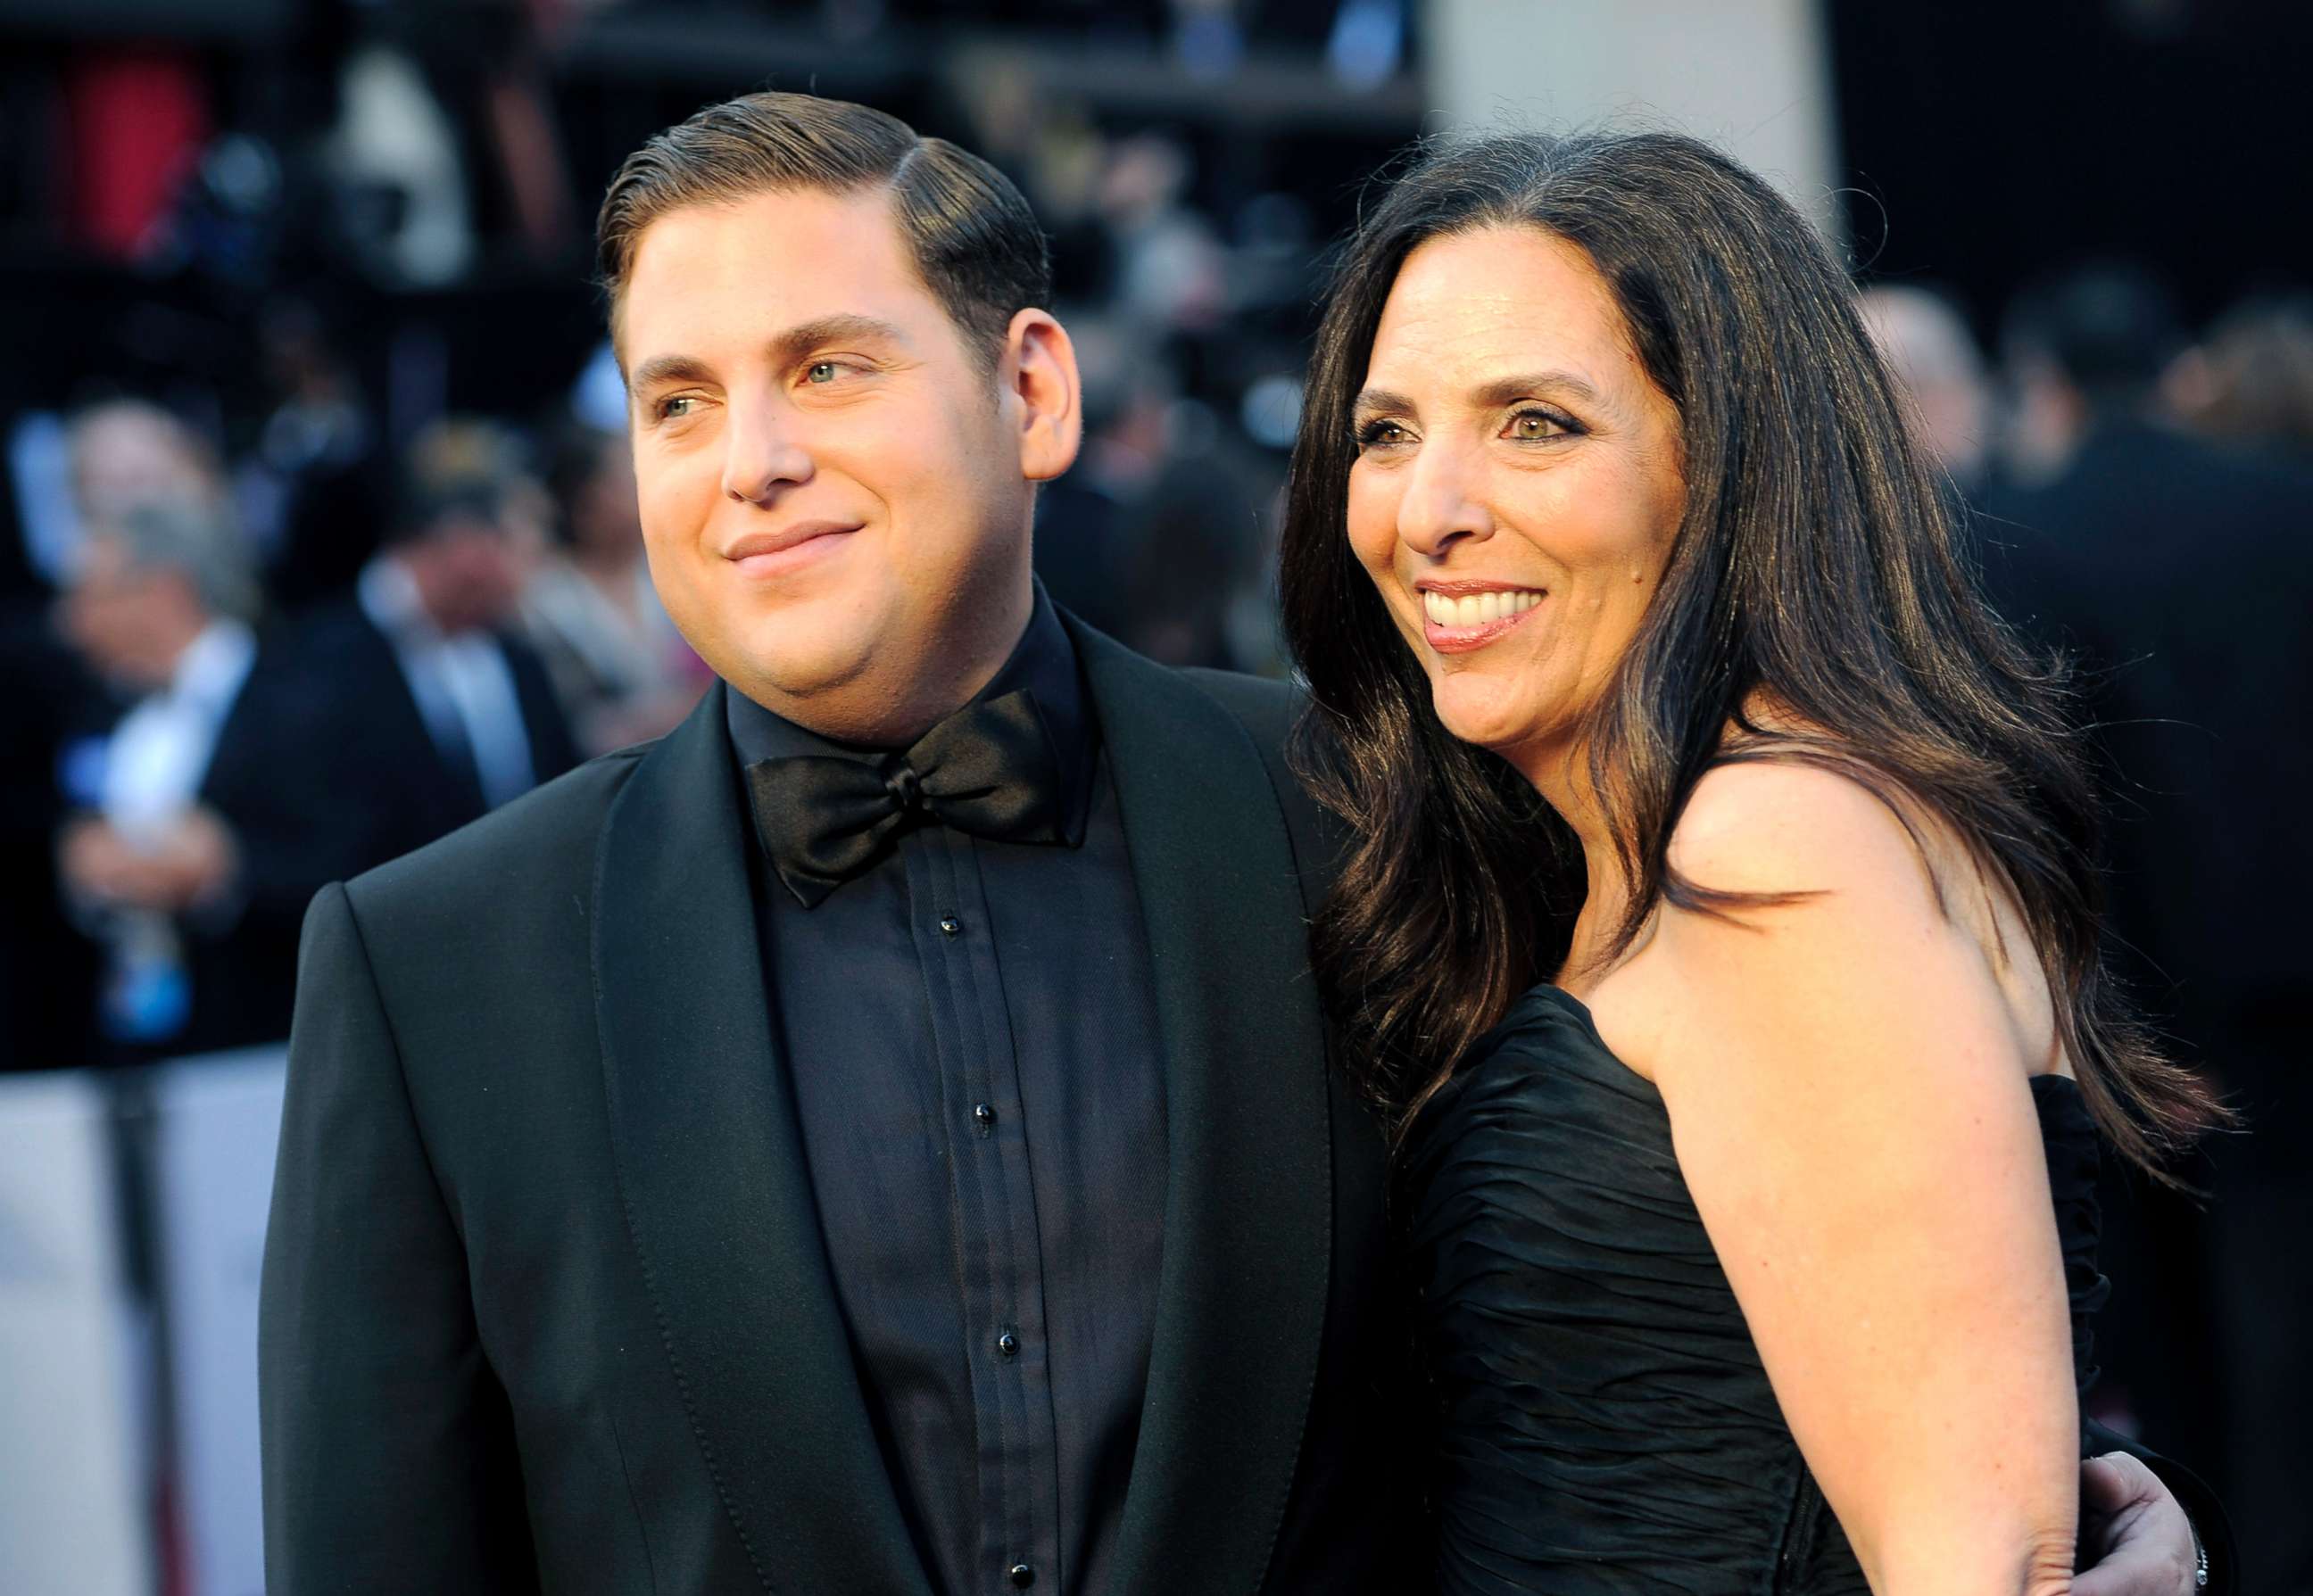 PHOTO: Jonah Hill, left, and mother Sharon Lyn arrive at the 84th Academy Awards, Feb. 26, 2012, in Los Angeles.